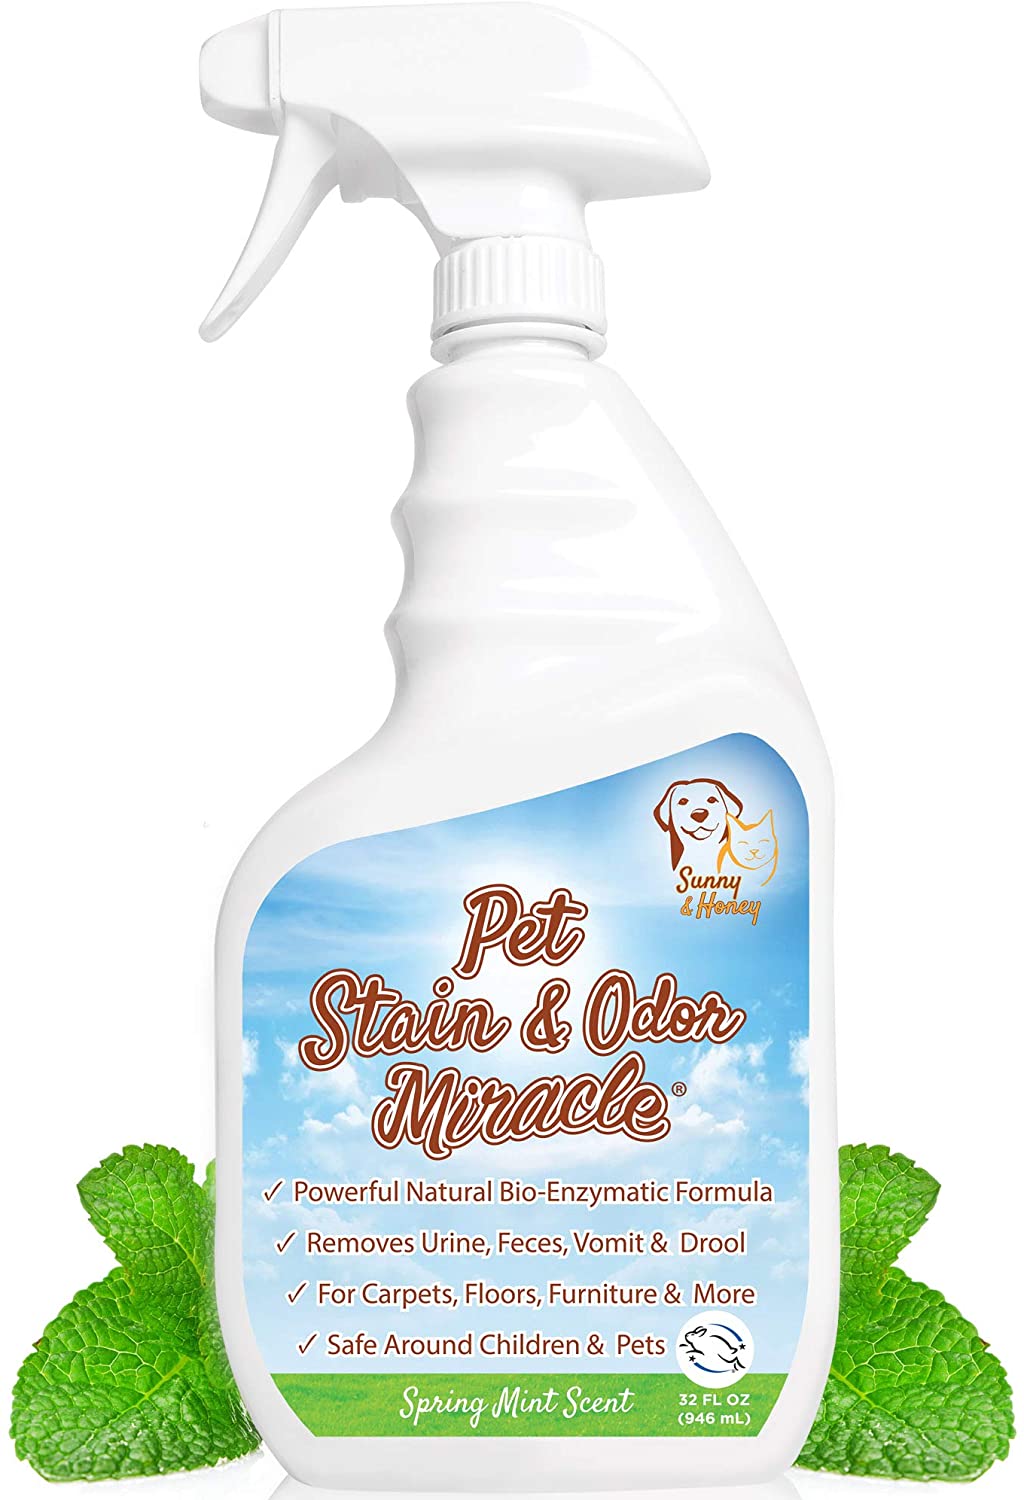 Sunny & Honey Pet Stain & Odor Miracle Urine Destroyer